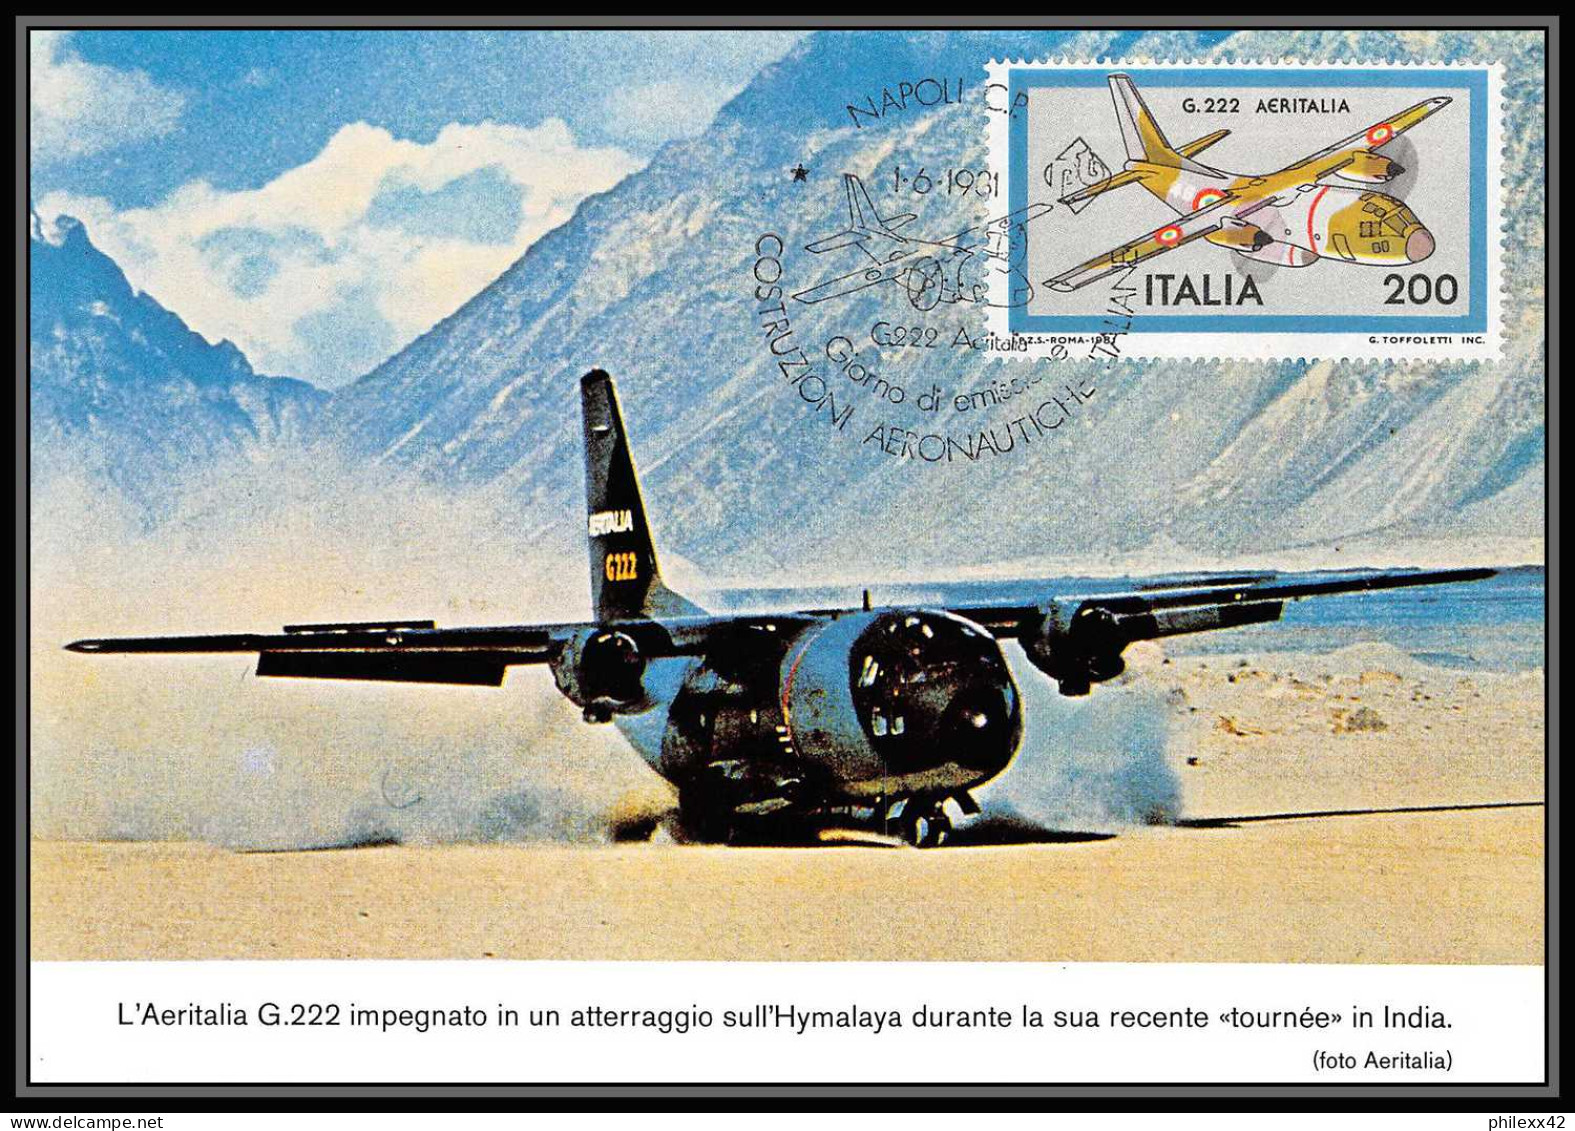 Italie (italy) - Carte maximum (card) 1994 - helicoptères avions plane airplanes 1981